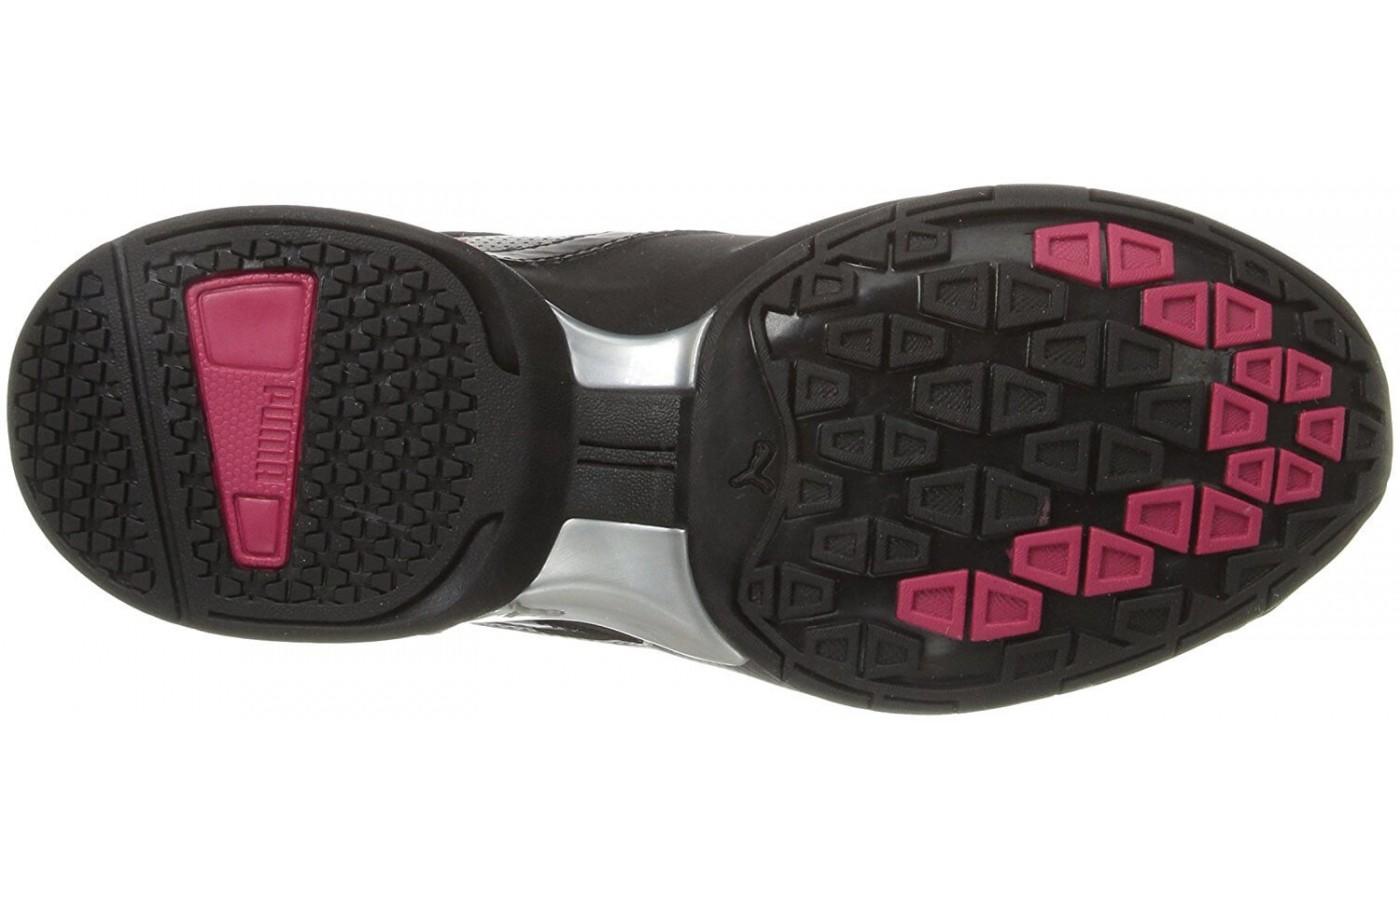 the outsole of the Puma Tazon 6 works on smooth surfaces